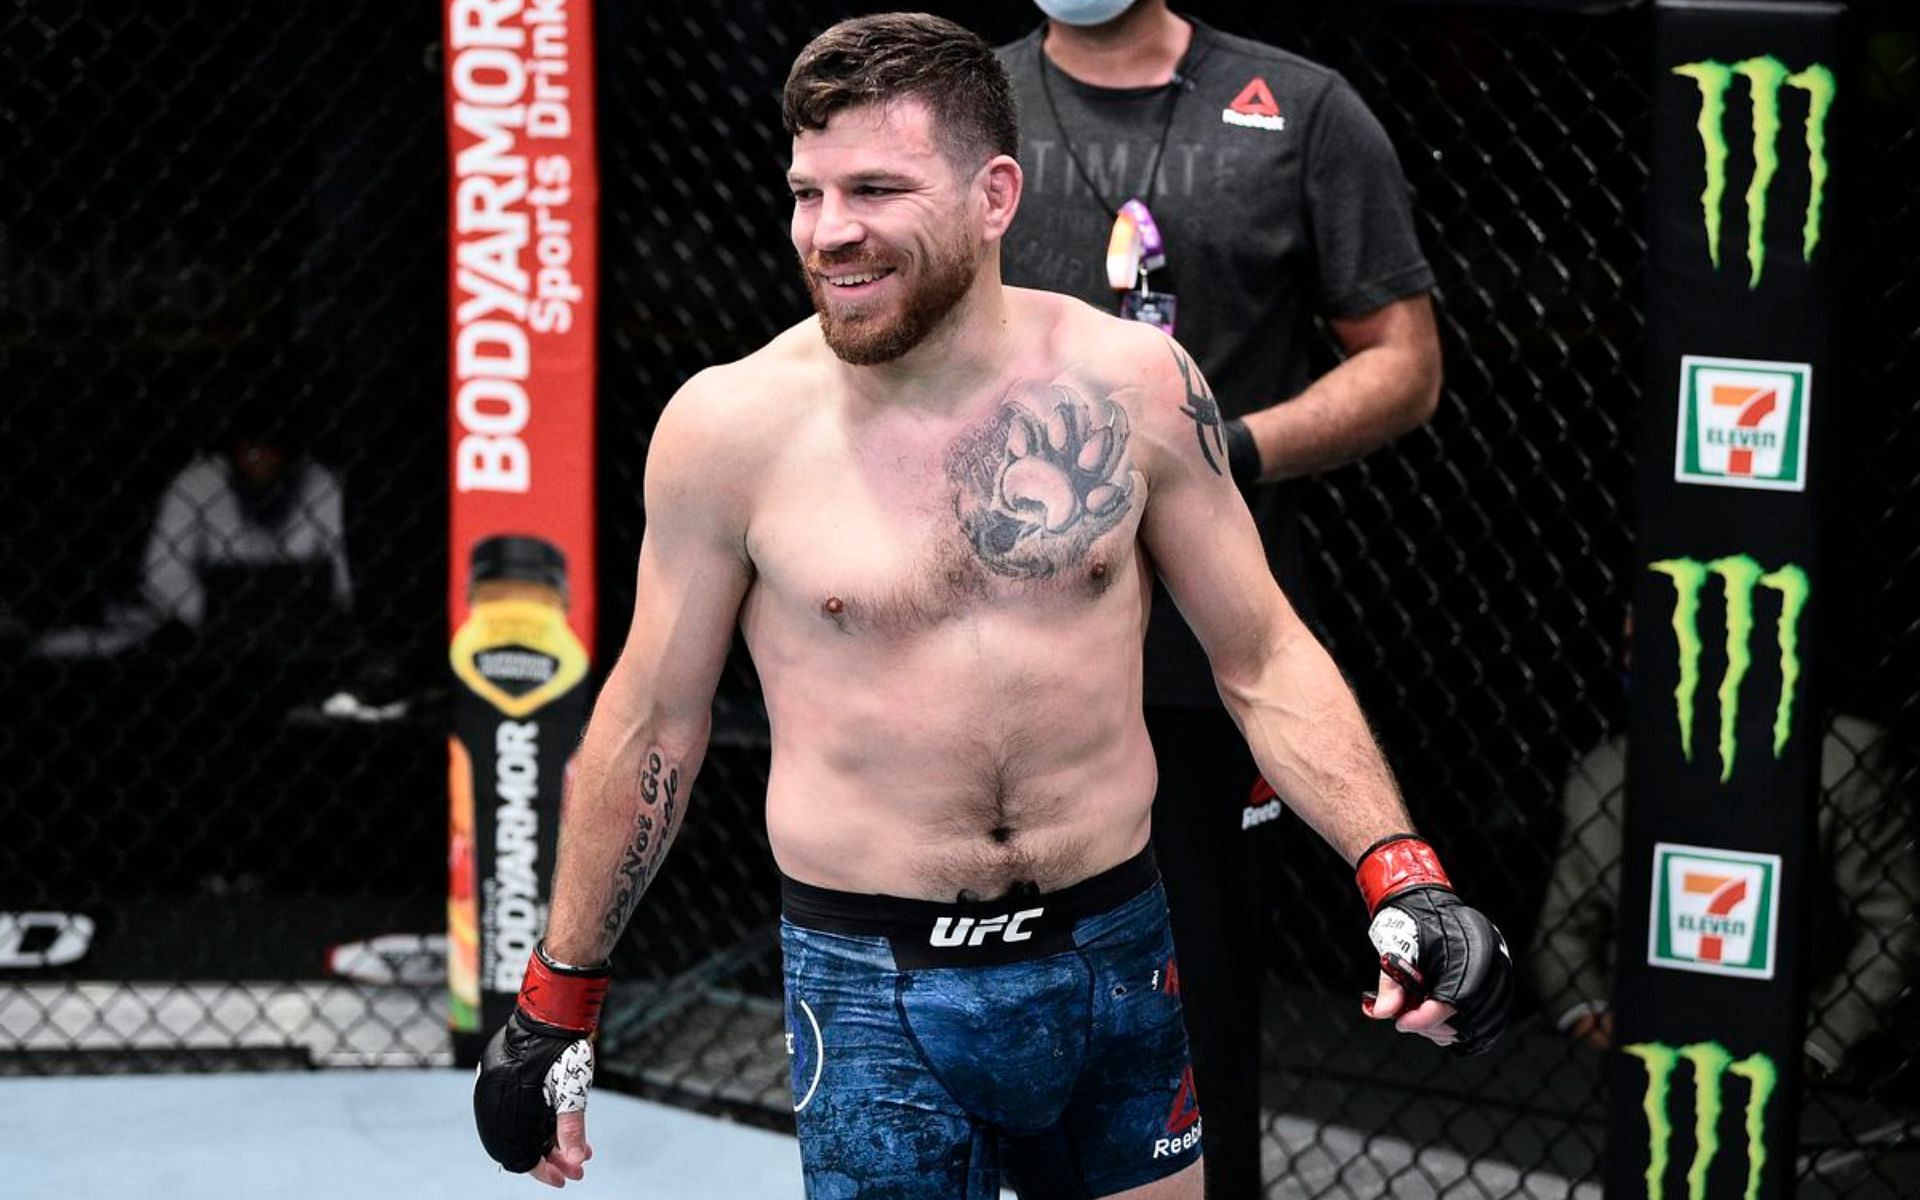 Jim Miller remains a dangerous fighter despite making his octagon debut 14 years ago.